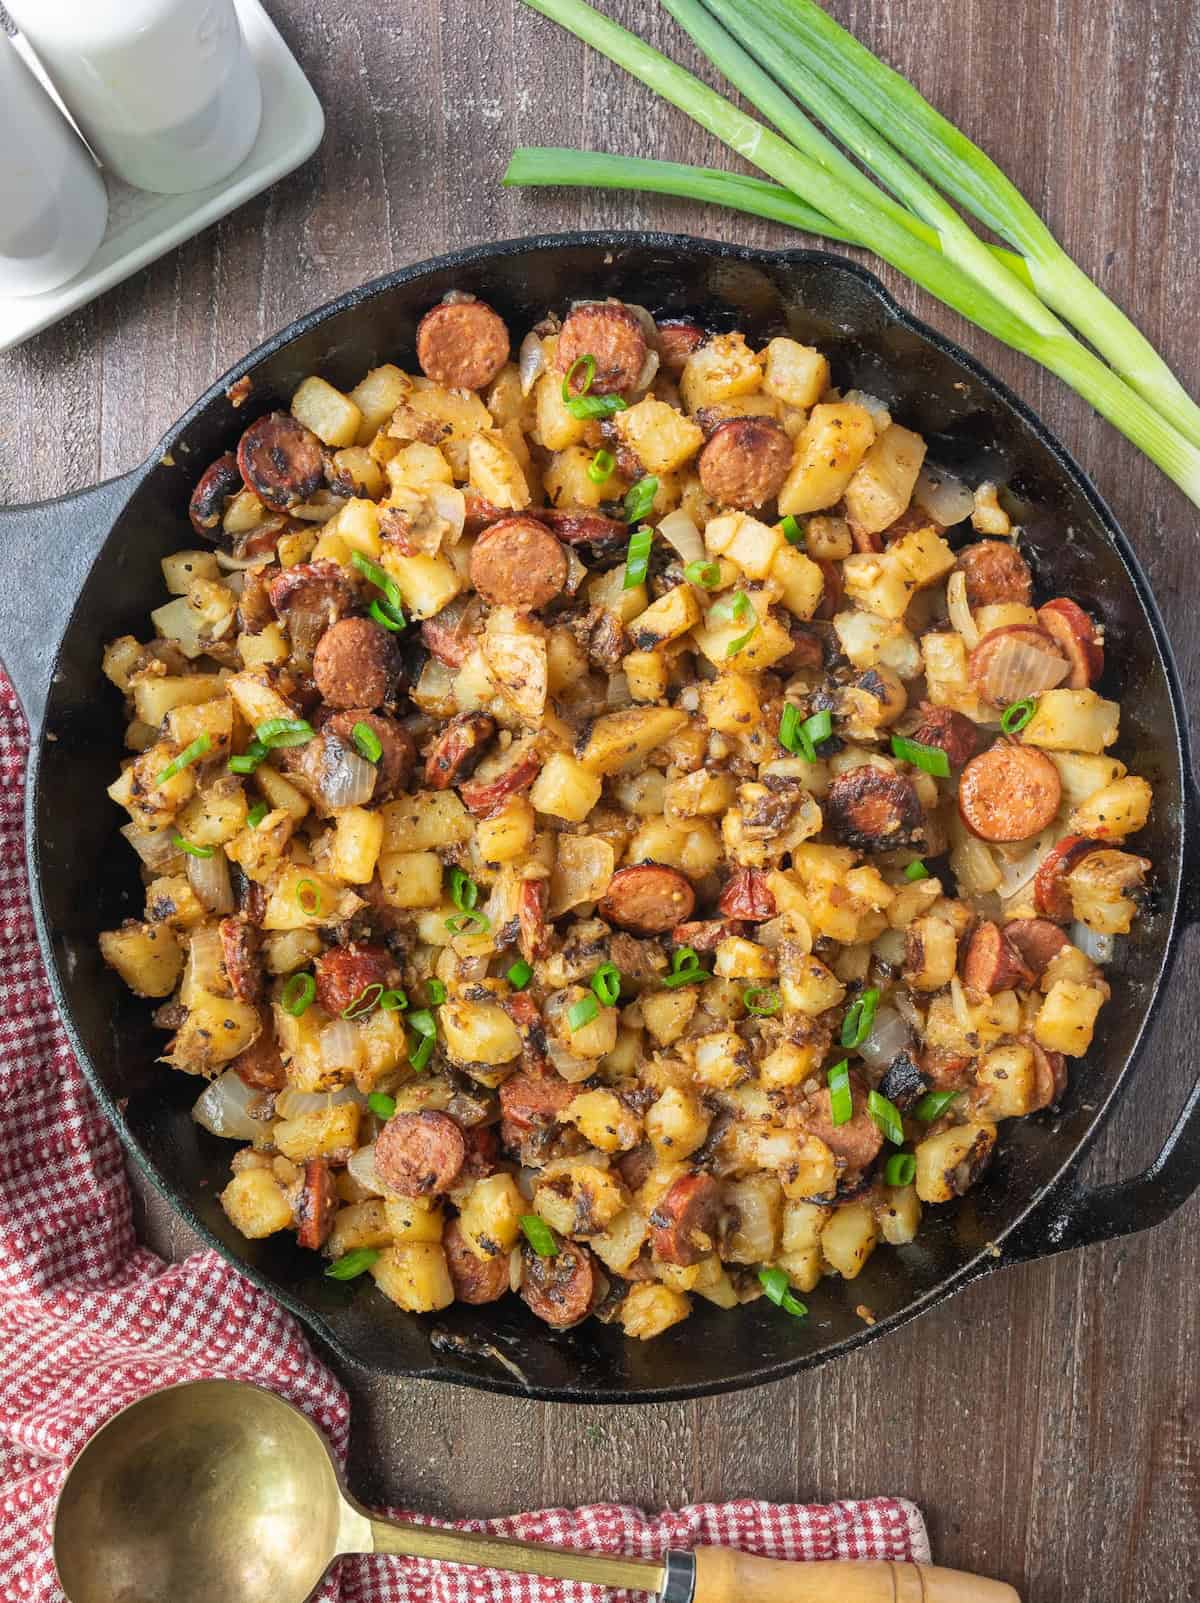 Southern fried potatoes in a skillet with sausages.